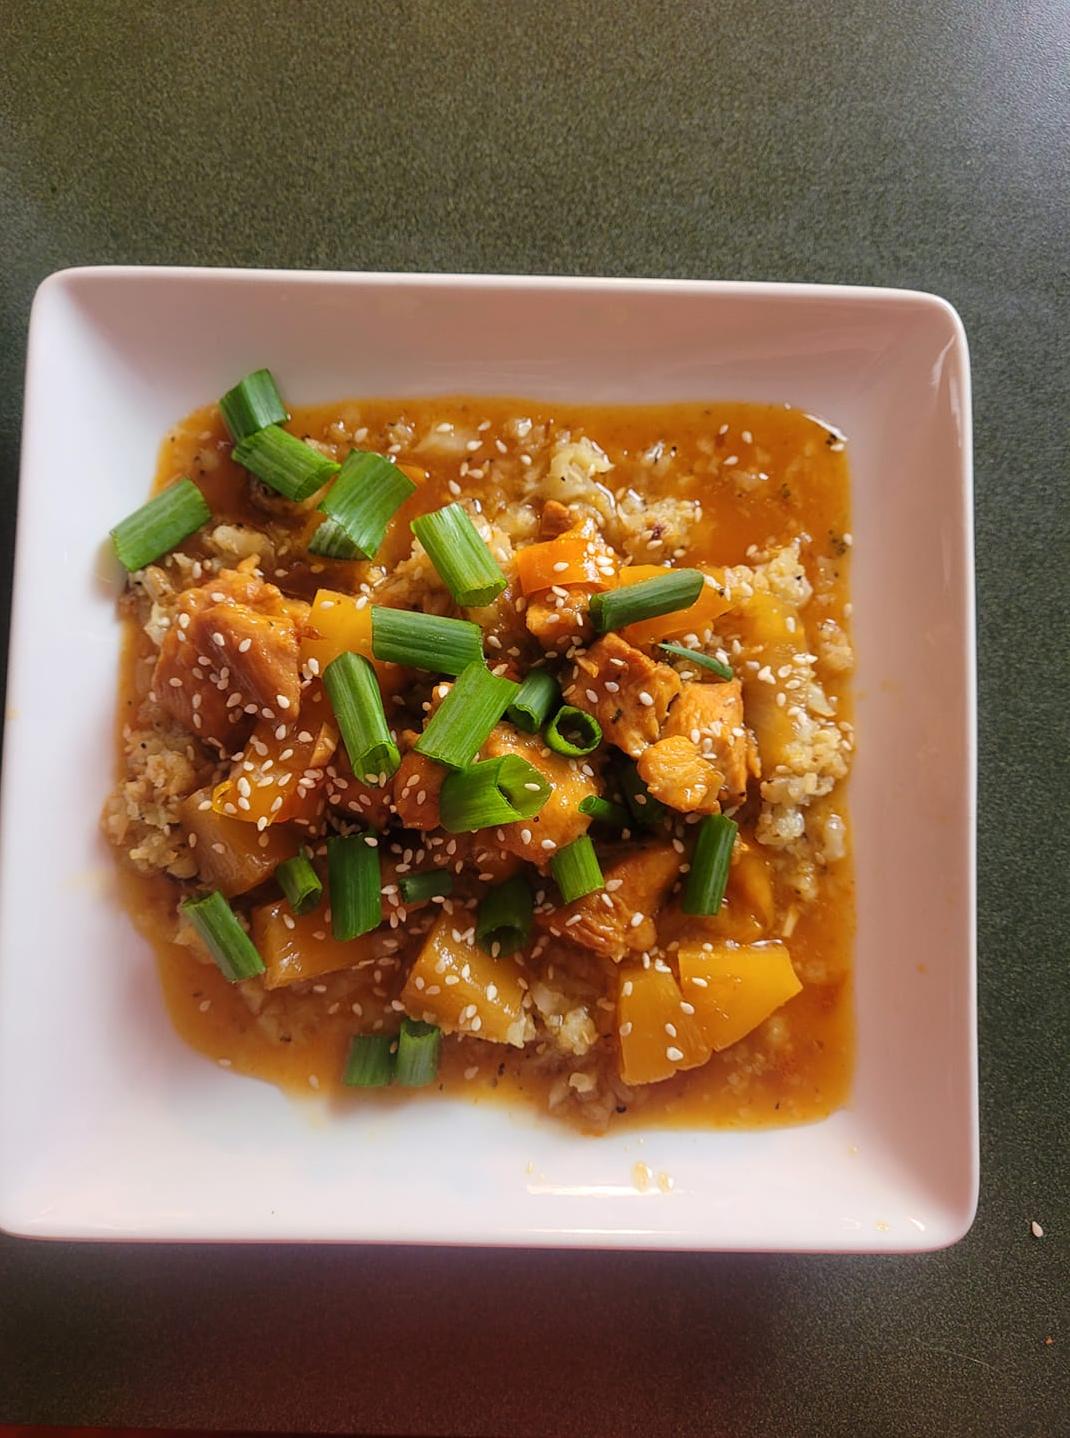  A healthier twist on classic sweet and sour chicken